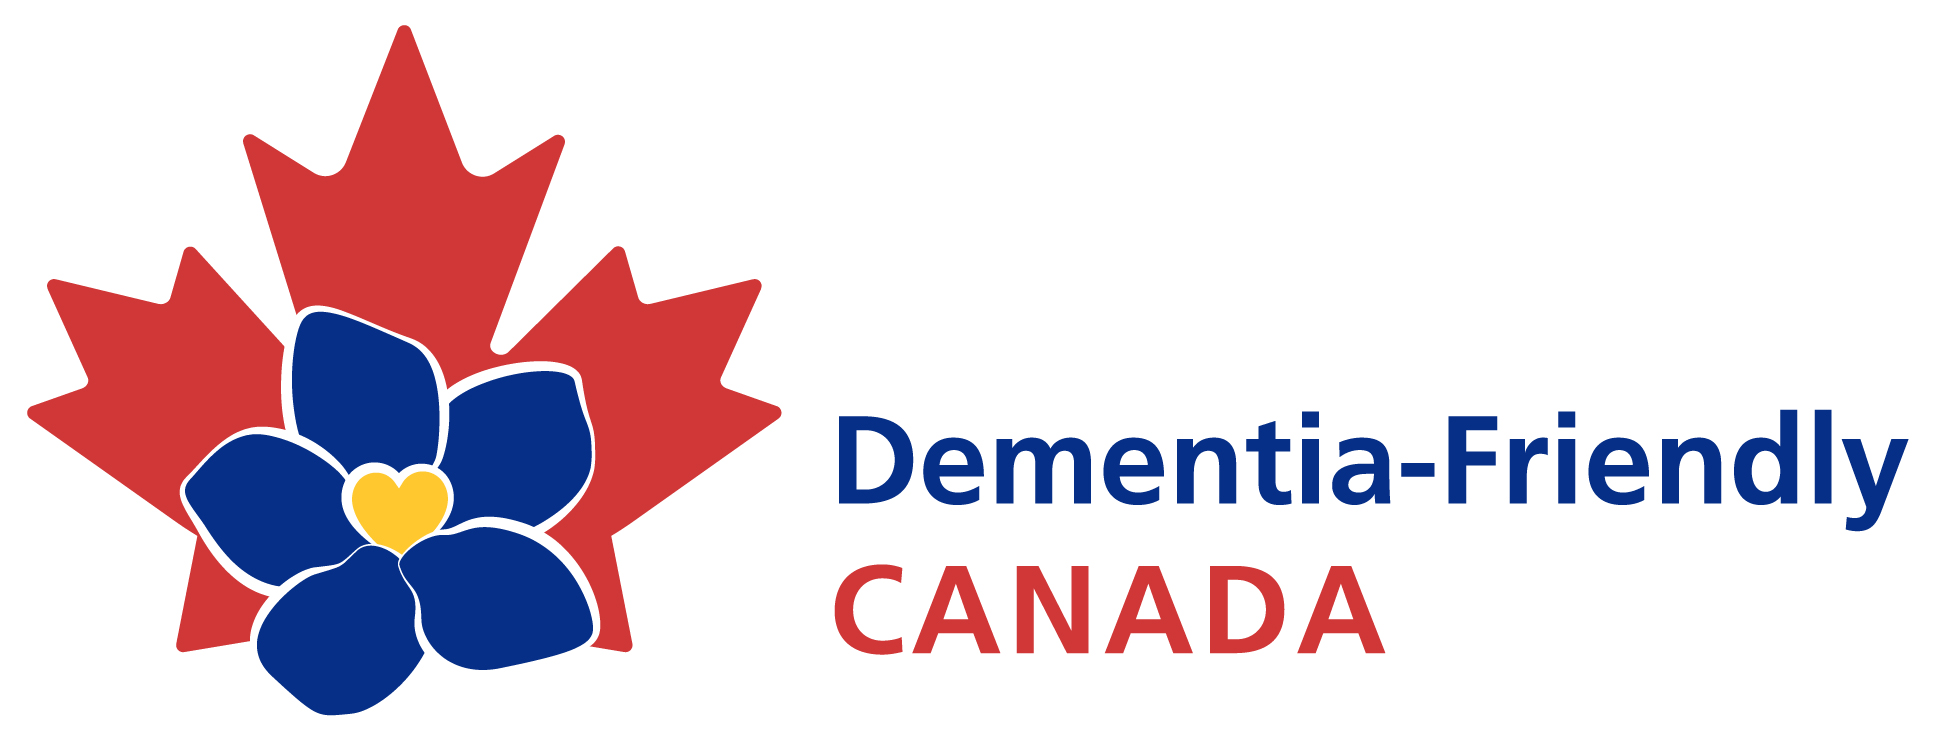 The logo for the Dementia-Friendly Canada project, which is a blue forget-me-not flower in front of a red maple leaf